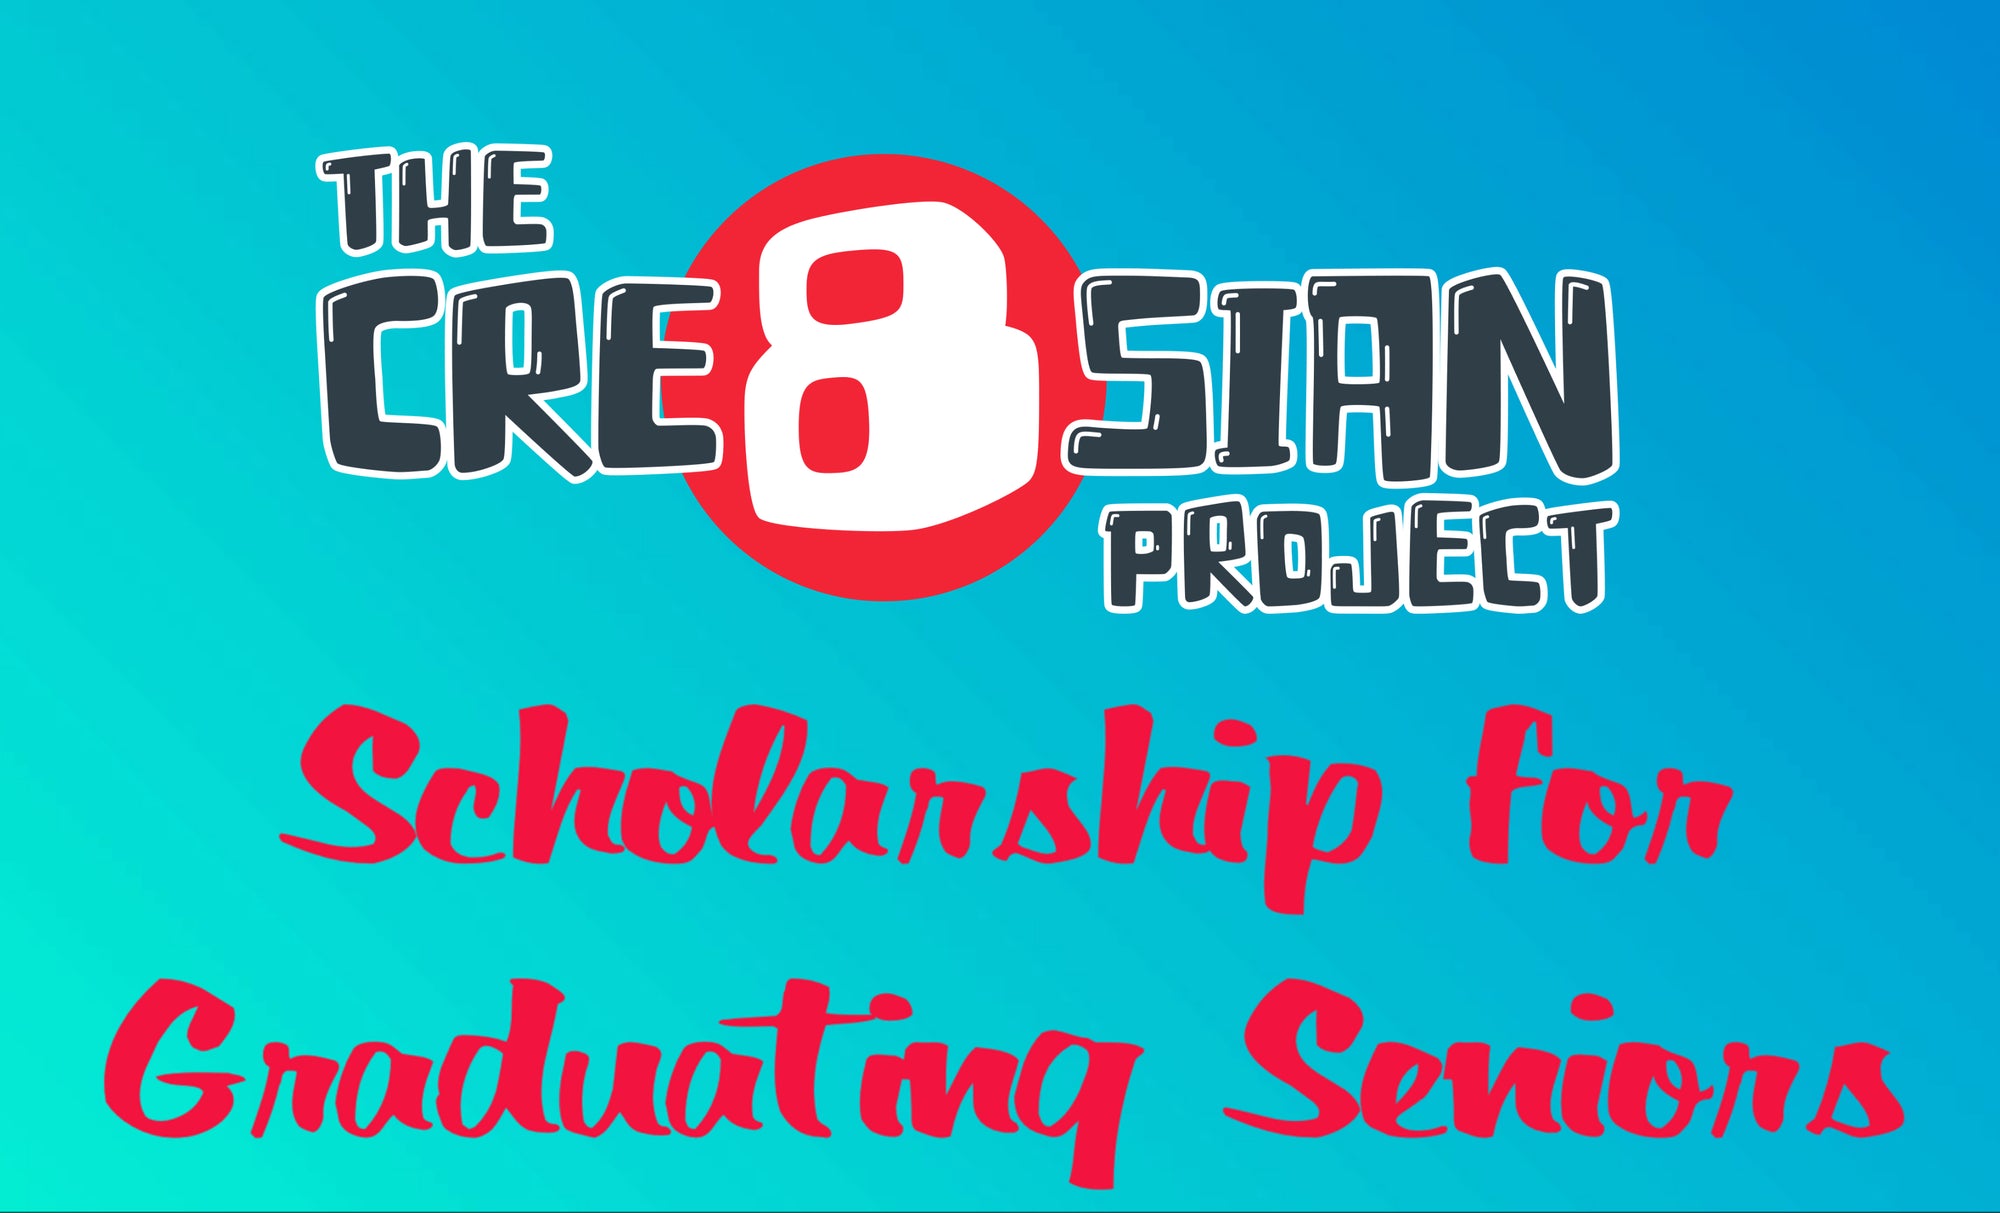 Announcing our winner of the special 2021 Cre8sian Project Scholarship for Graduating Seniors